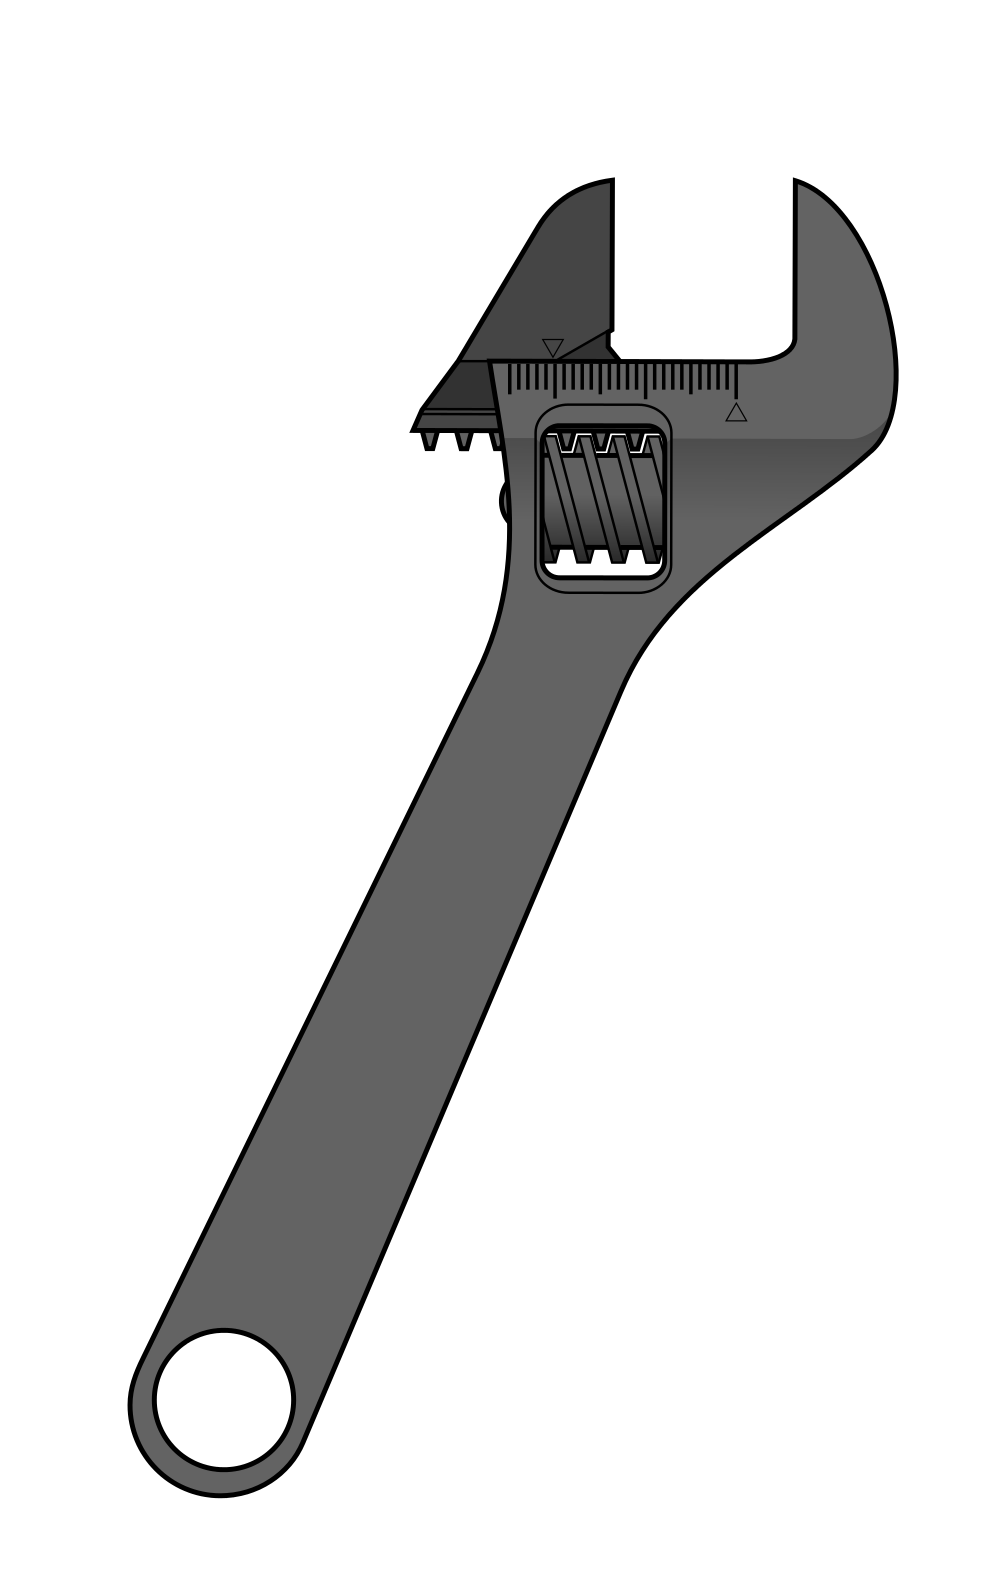 File adjustable svg wikimedia. Hand clipart wrench